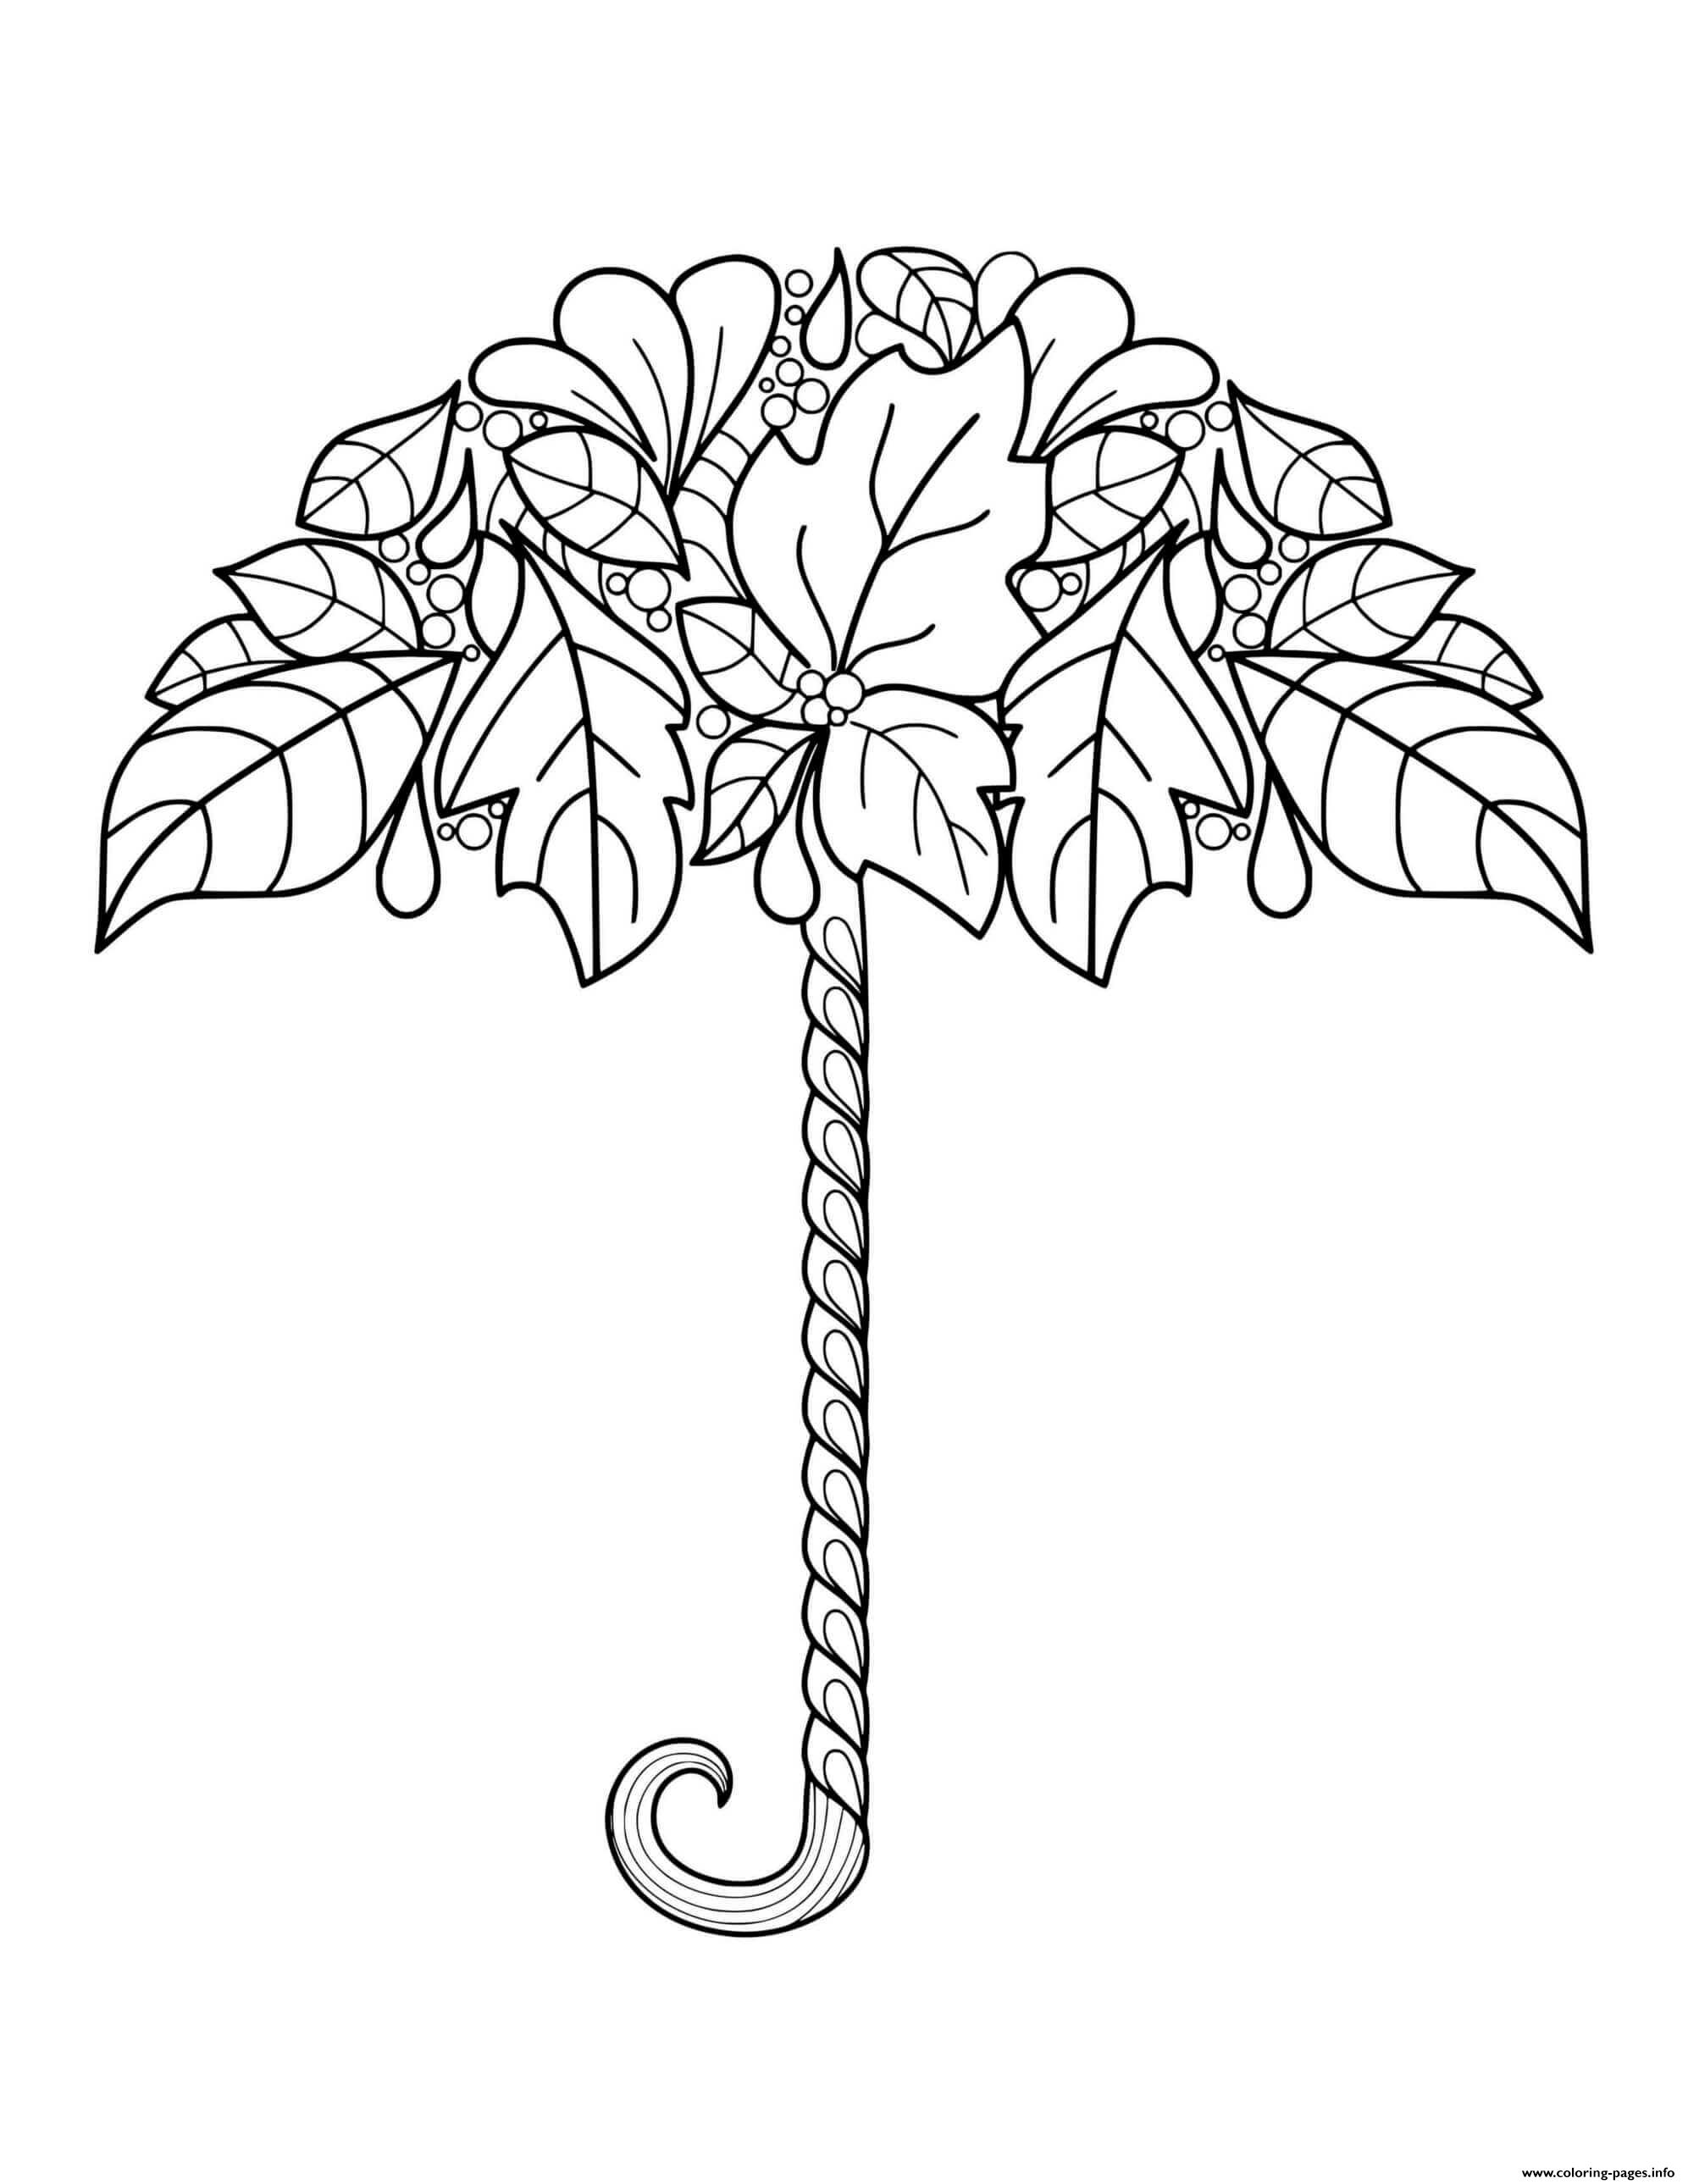 Fall Autumn Leaf Umbrella For Adults Coloring Pages Printable